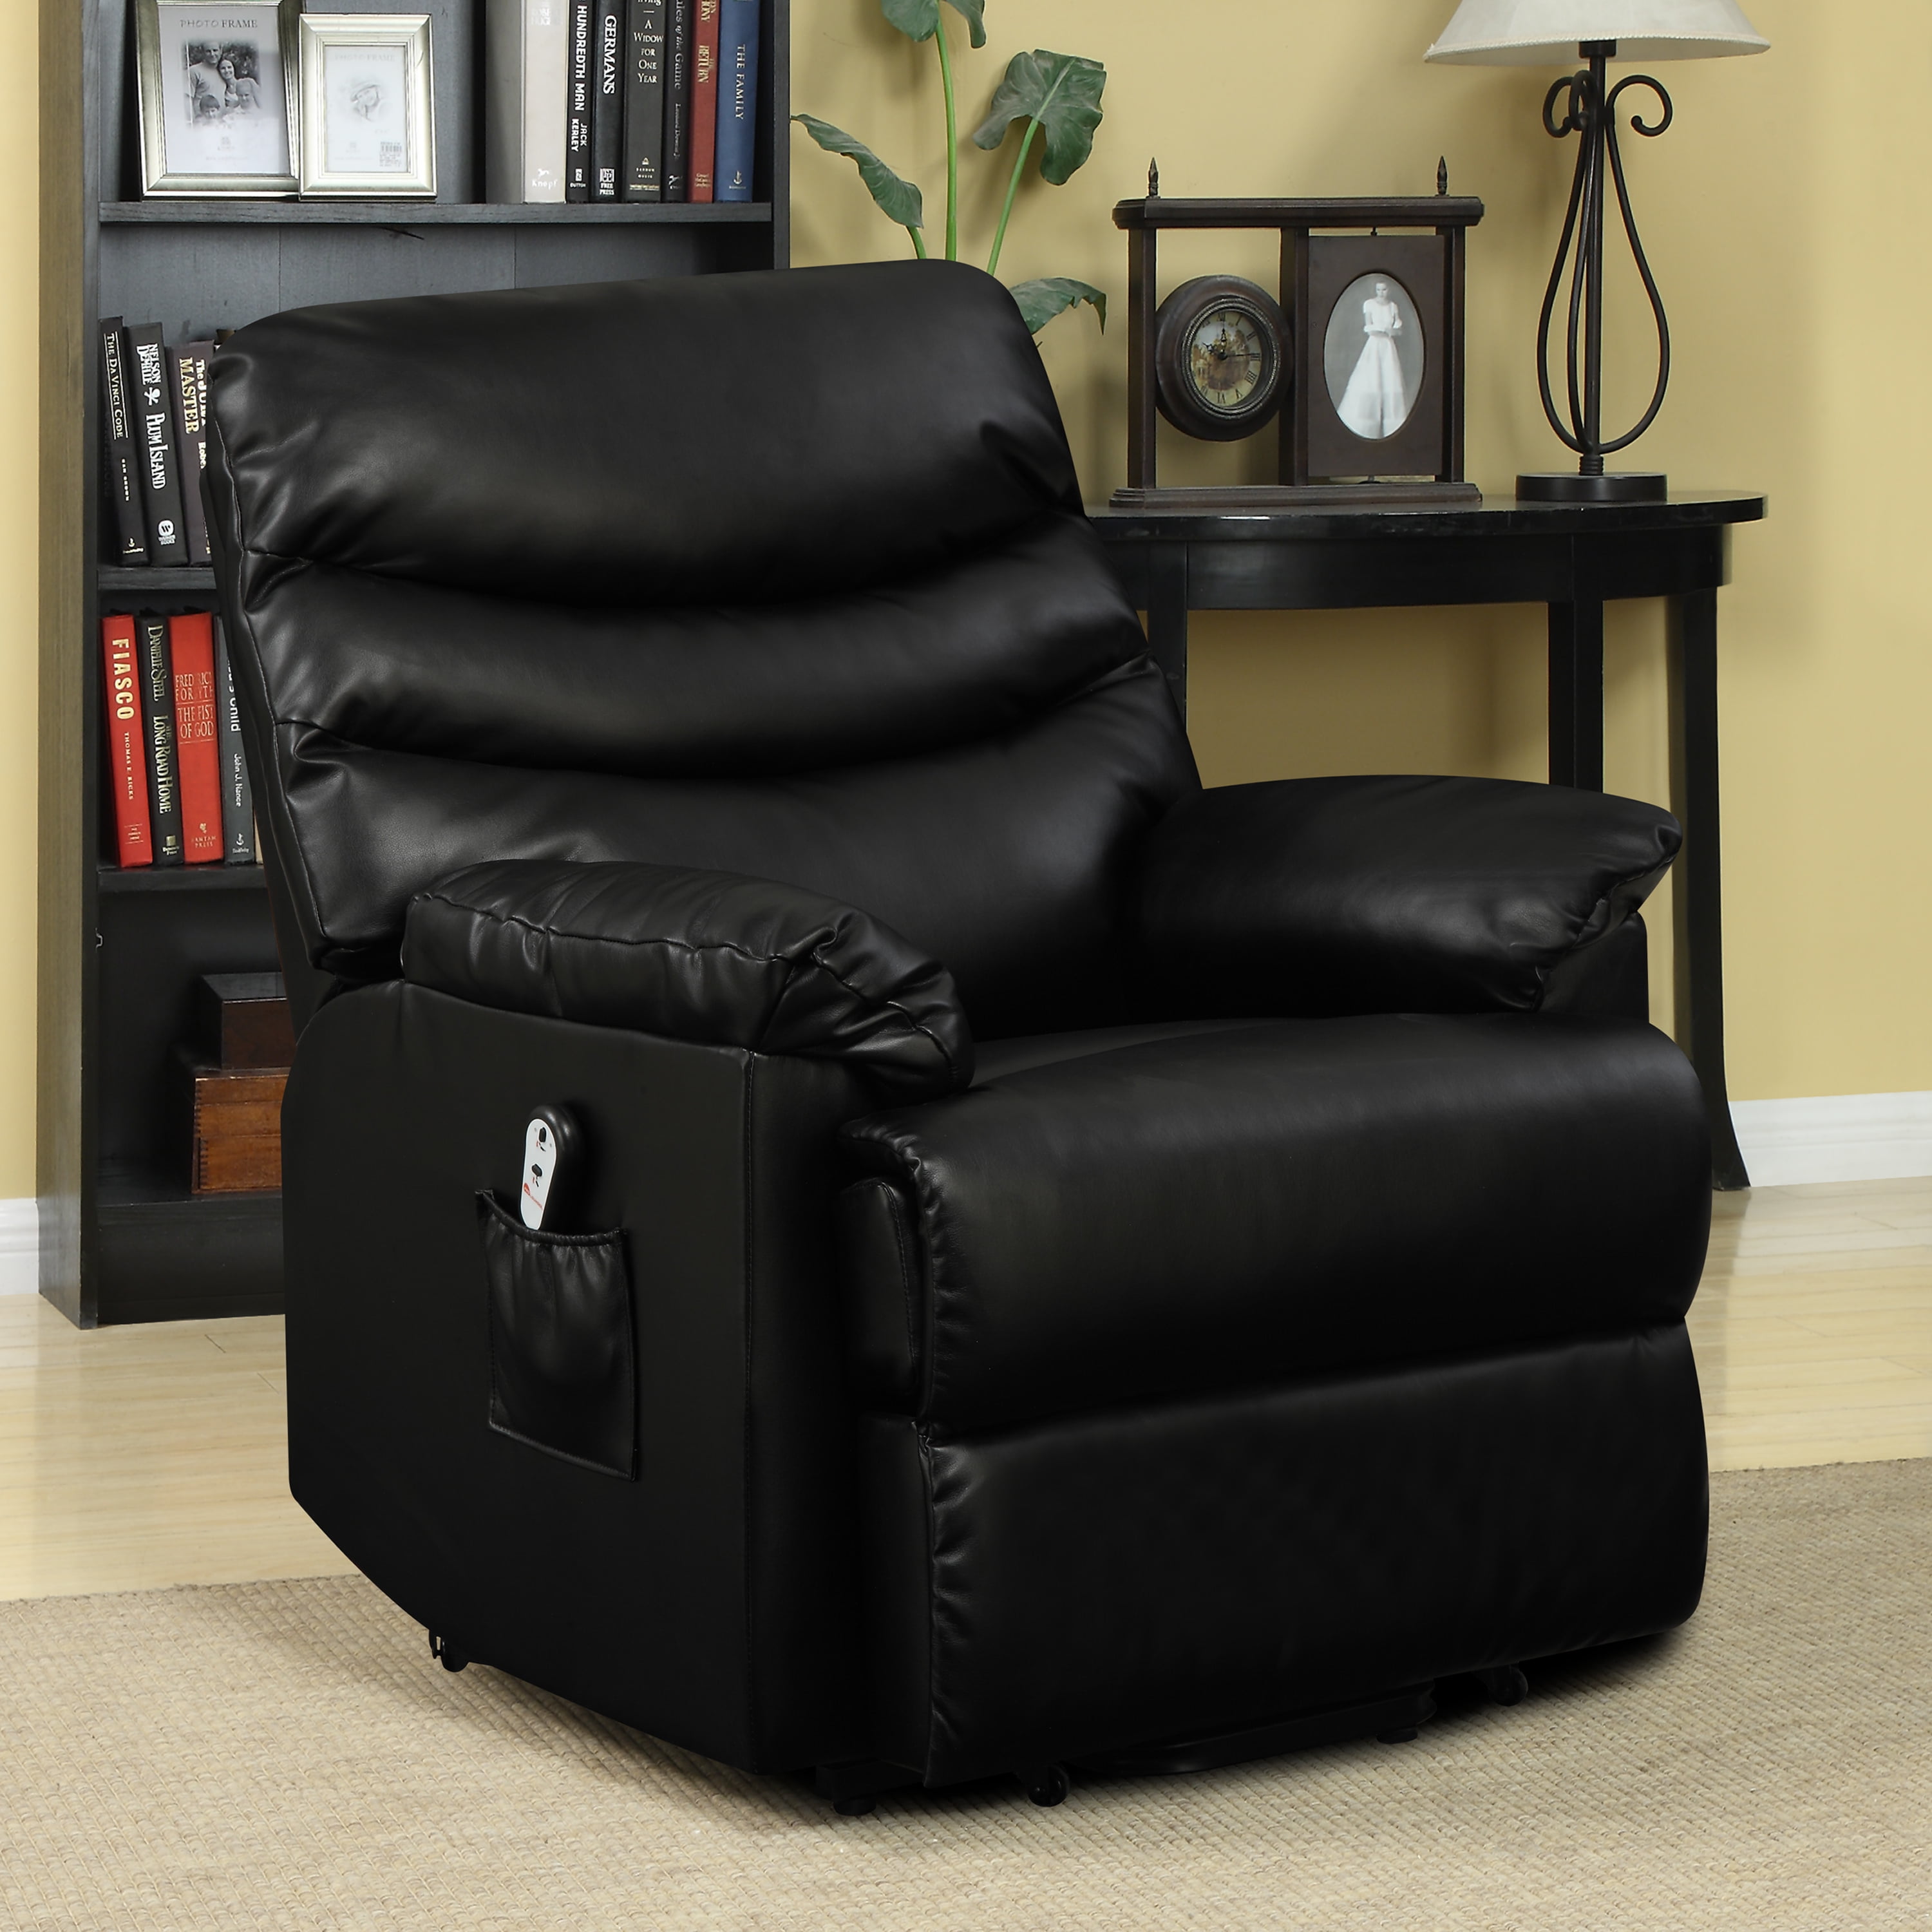 homesvale ordway renu leather wall hugger power recliner and lift chair  black  walmart